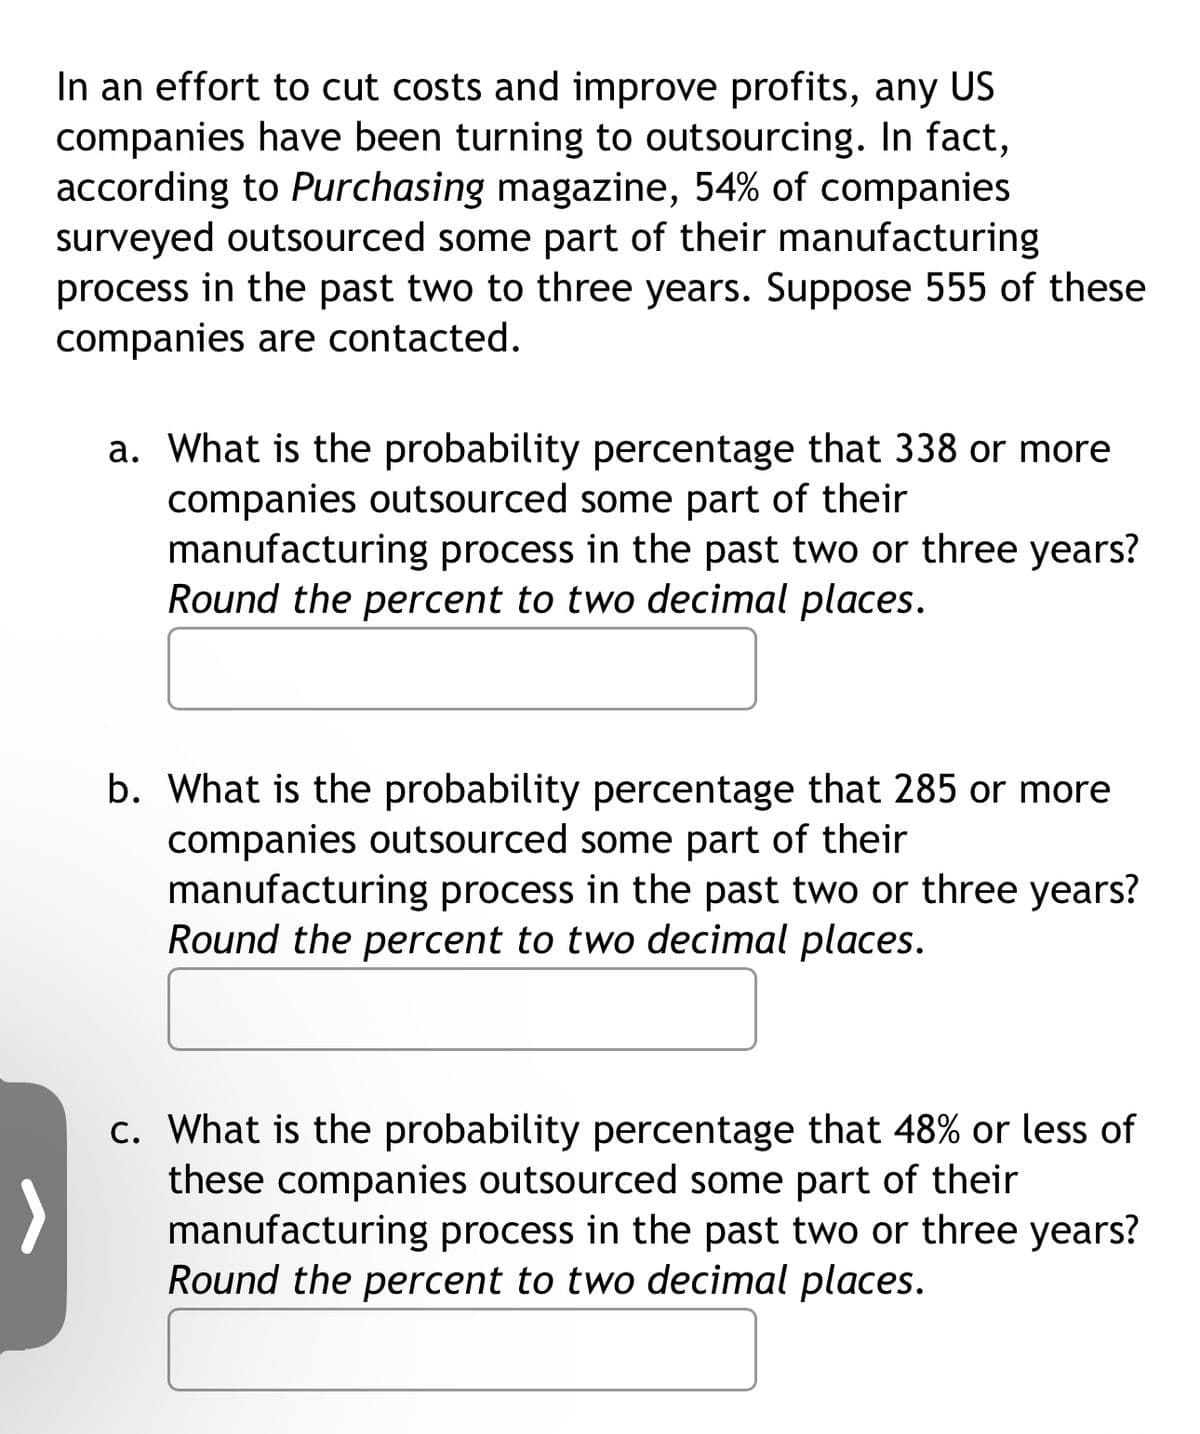 In an effort to cut costs and improve profits, any US
companies have been turning to outsourcing. In fact,
according to Purchasing magazine, 54% of companies
surveyed outsourced some part of their manufacturing
process in the past two to three years. Suppose 555 of these
companies are contacted.
a. What is the probability percentage that 338 or more
companies outsourced some part of their
manufacturing process in the past two or three years?
Round the percent to two decimal places.
b. What is the probability percentage that 285 or more
companies outsourced some part of their
manufacturing process in the past two or three years?
Round the percent to two decimal places.
c. What is the probability percentage that 48% or less of
these companies outsourced some part of their
manufacturing process in the past two or three years?
Round the percent to two decimal places.